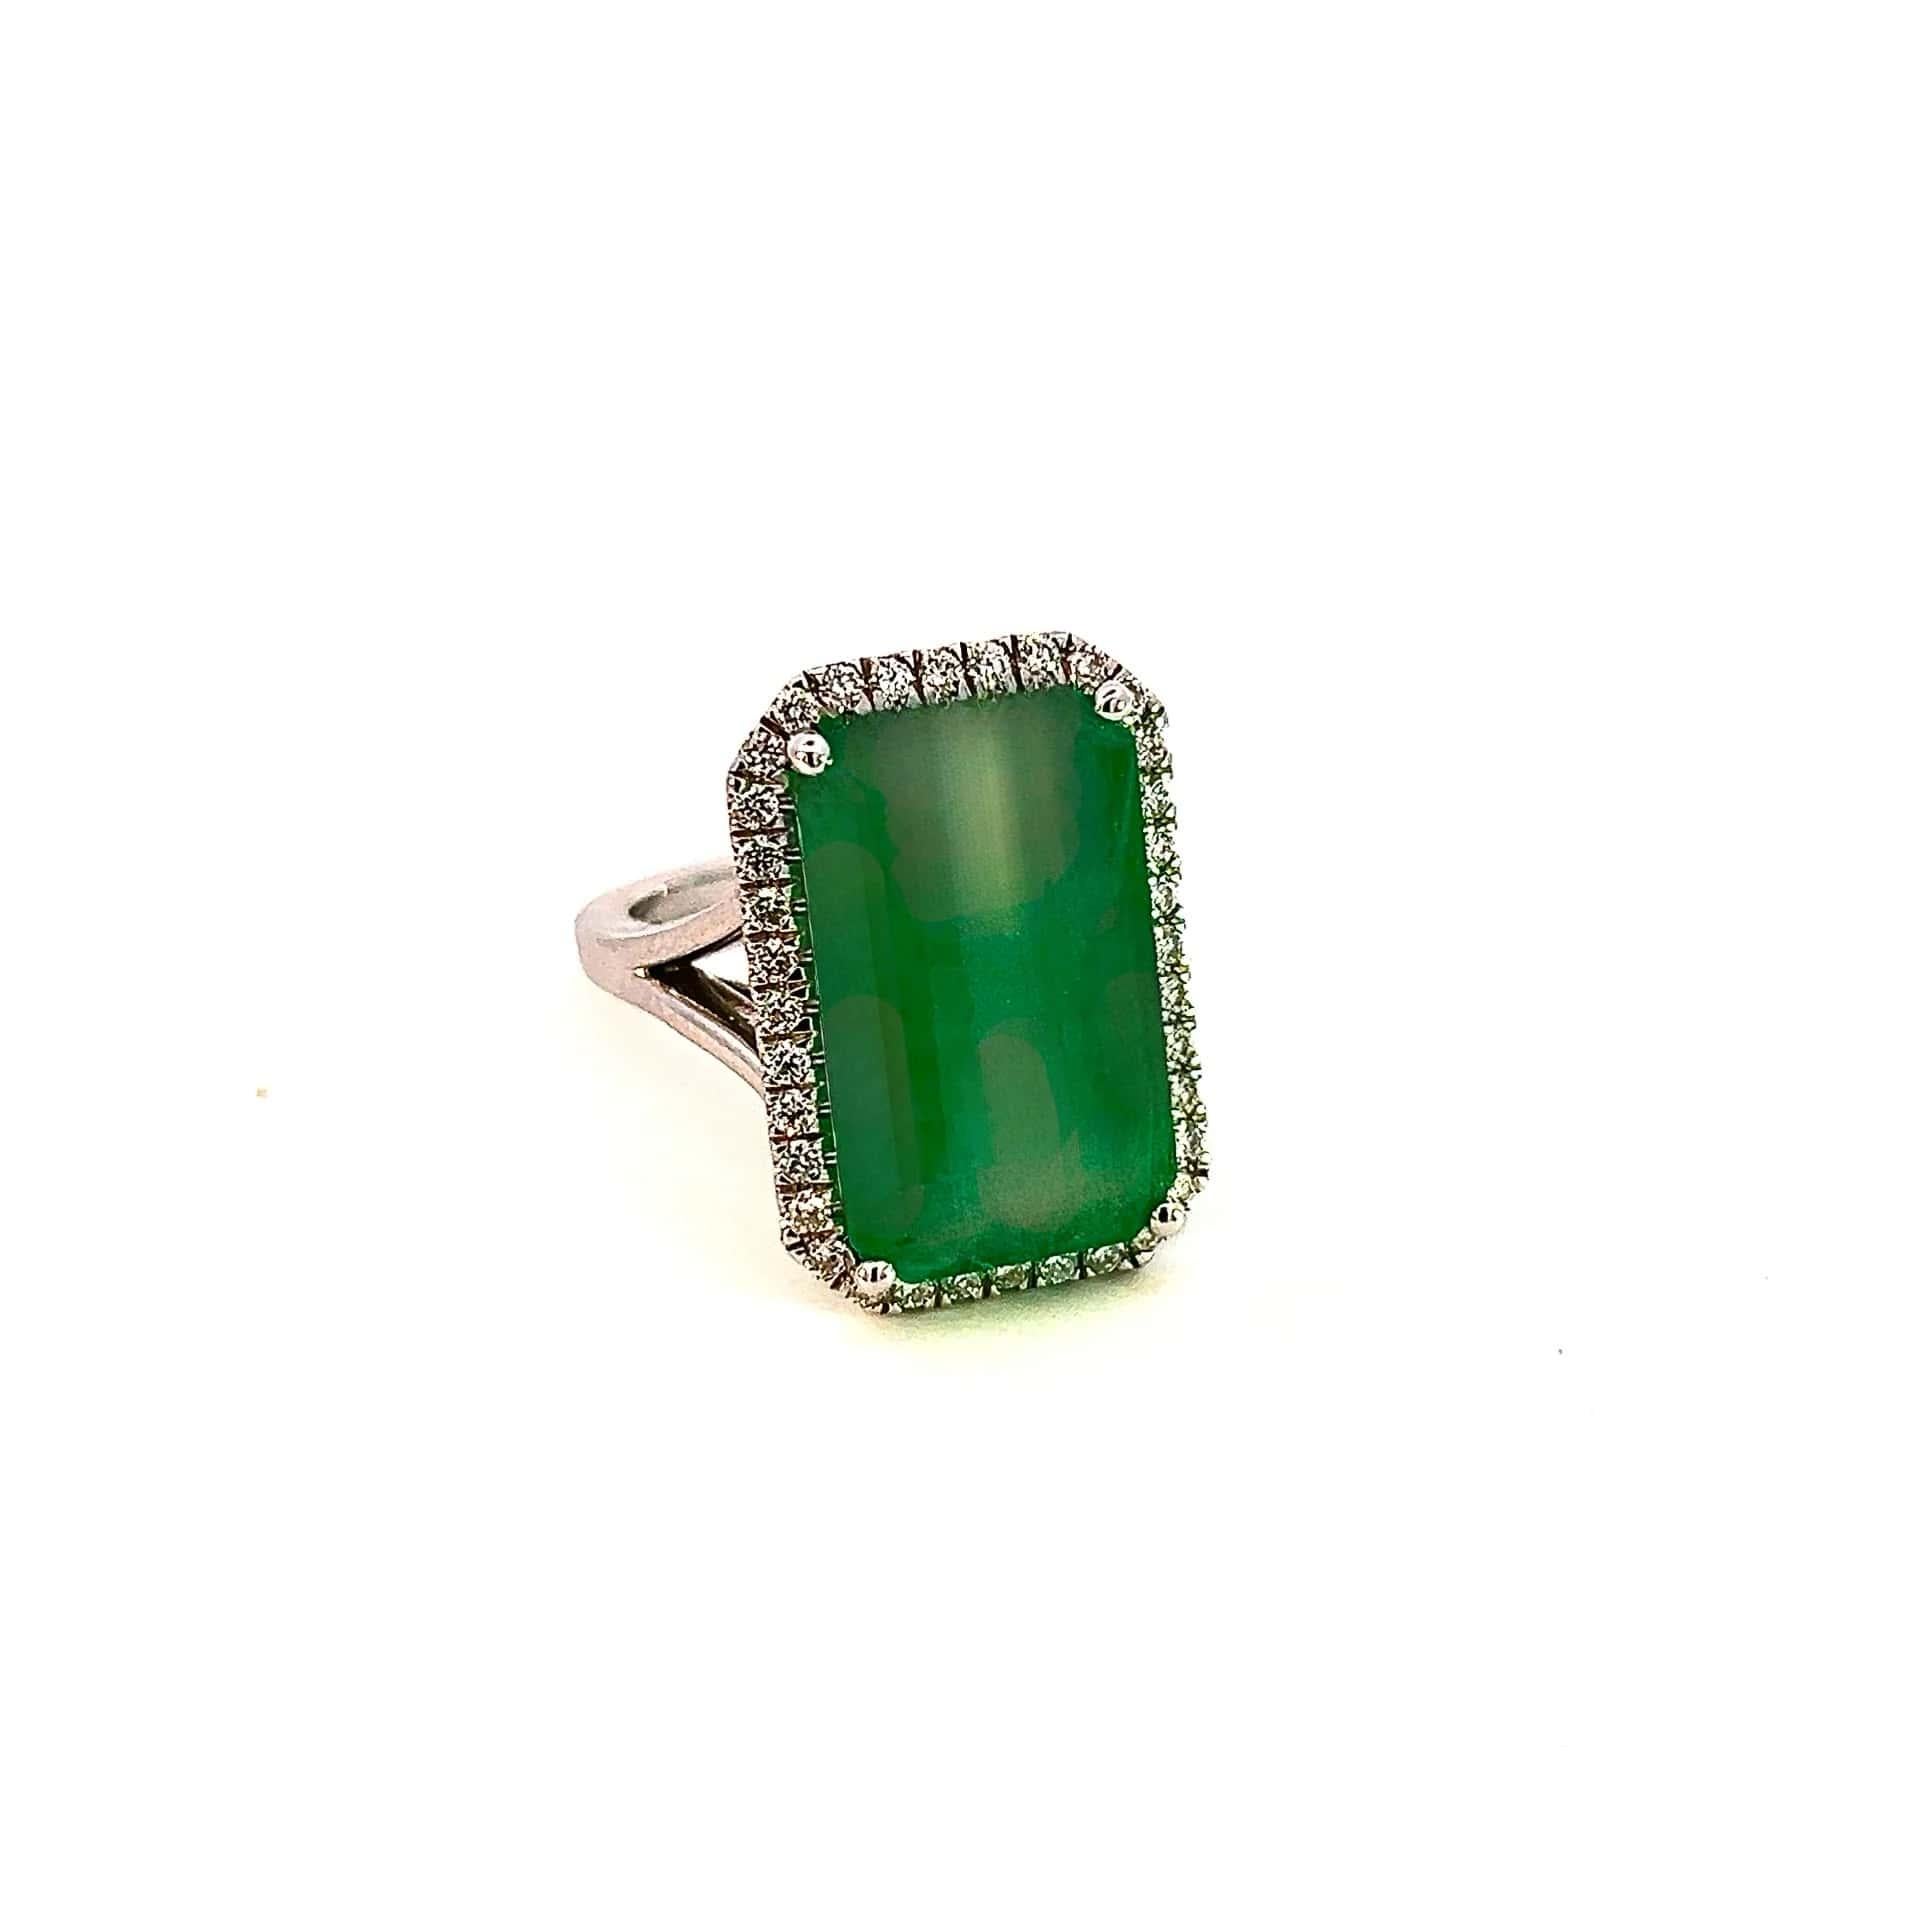 Natural Emerald Diamond Ring 6.5 14k White Gold 12.08 TCW Certified In Good Condition For Sale In Brooklyn, NY